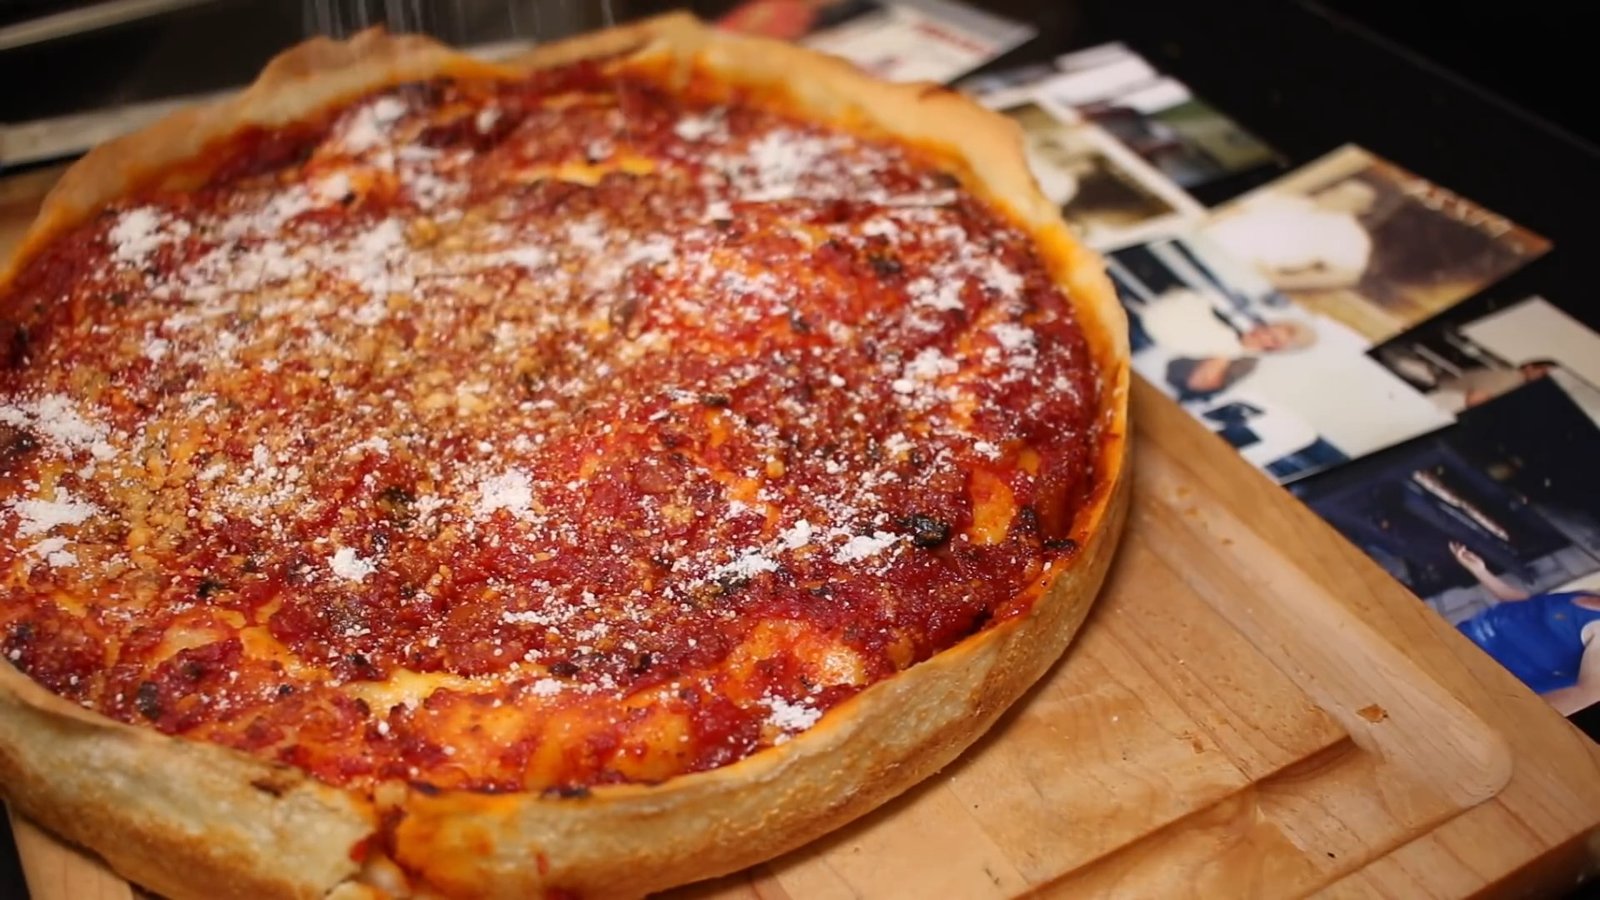 How to Make the Best Chicago-Style Pizza: Tips and Tricks for Perfect Pizza Every Time